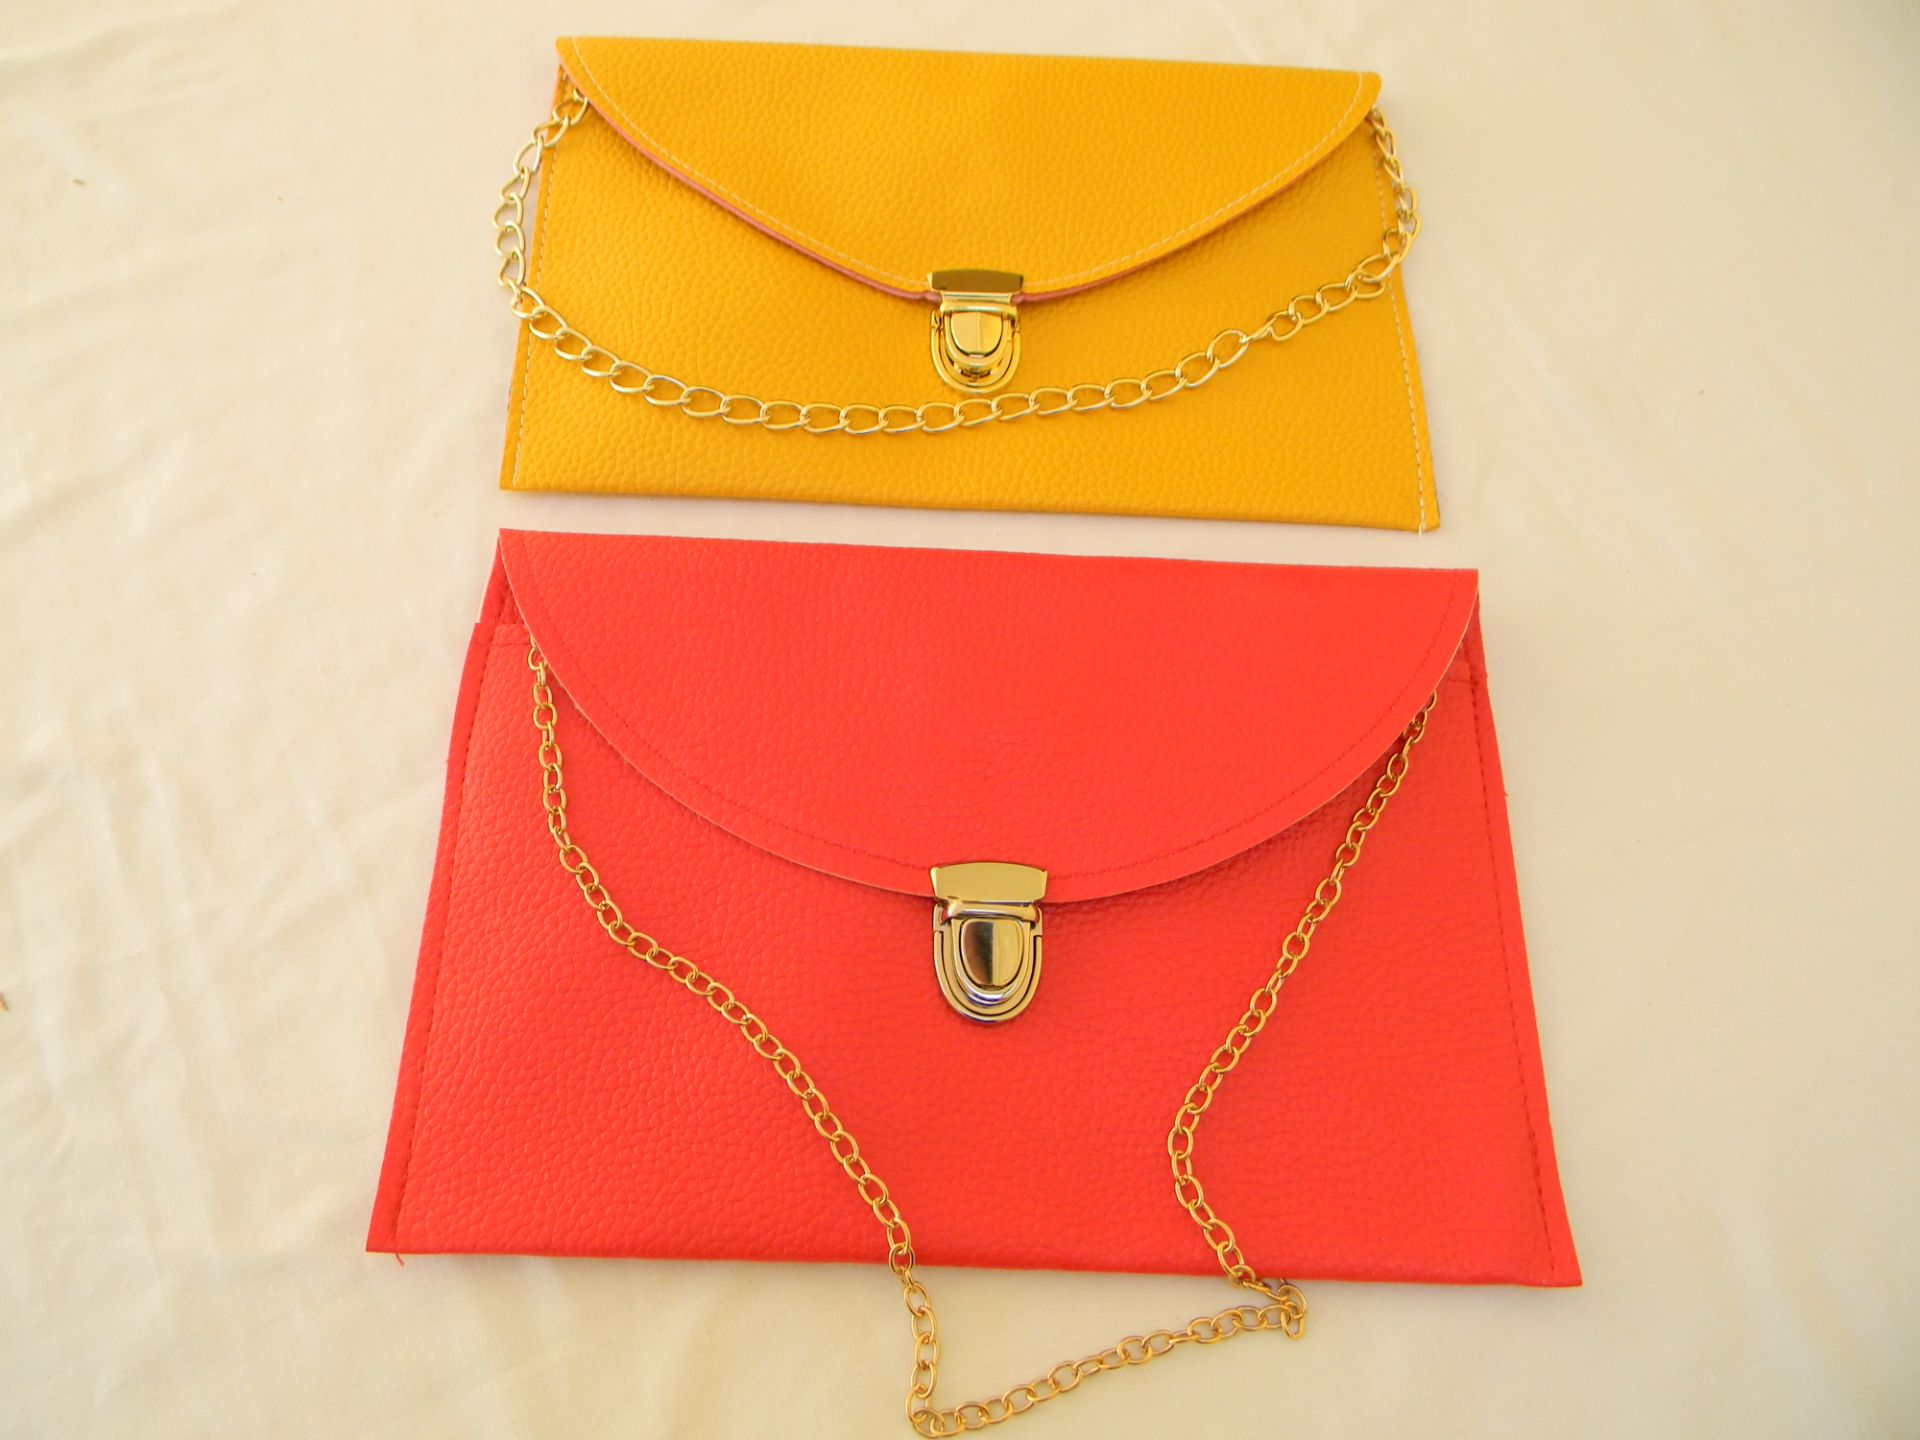 2 x Chain bag shoulder evening clutch bag (Yellow/Red/)